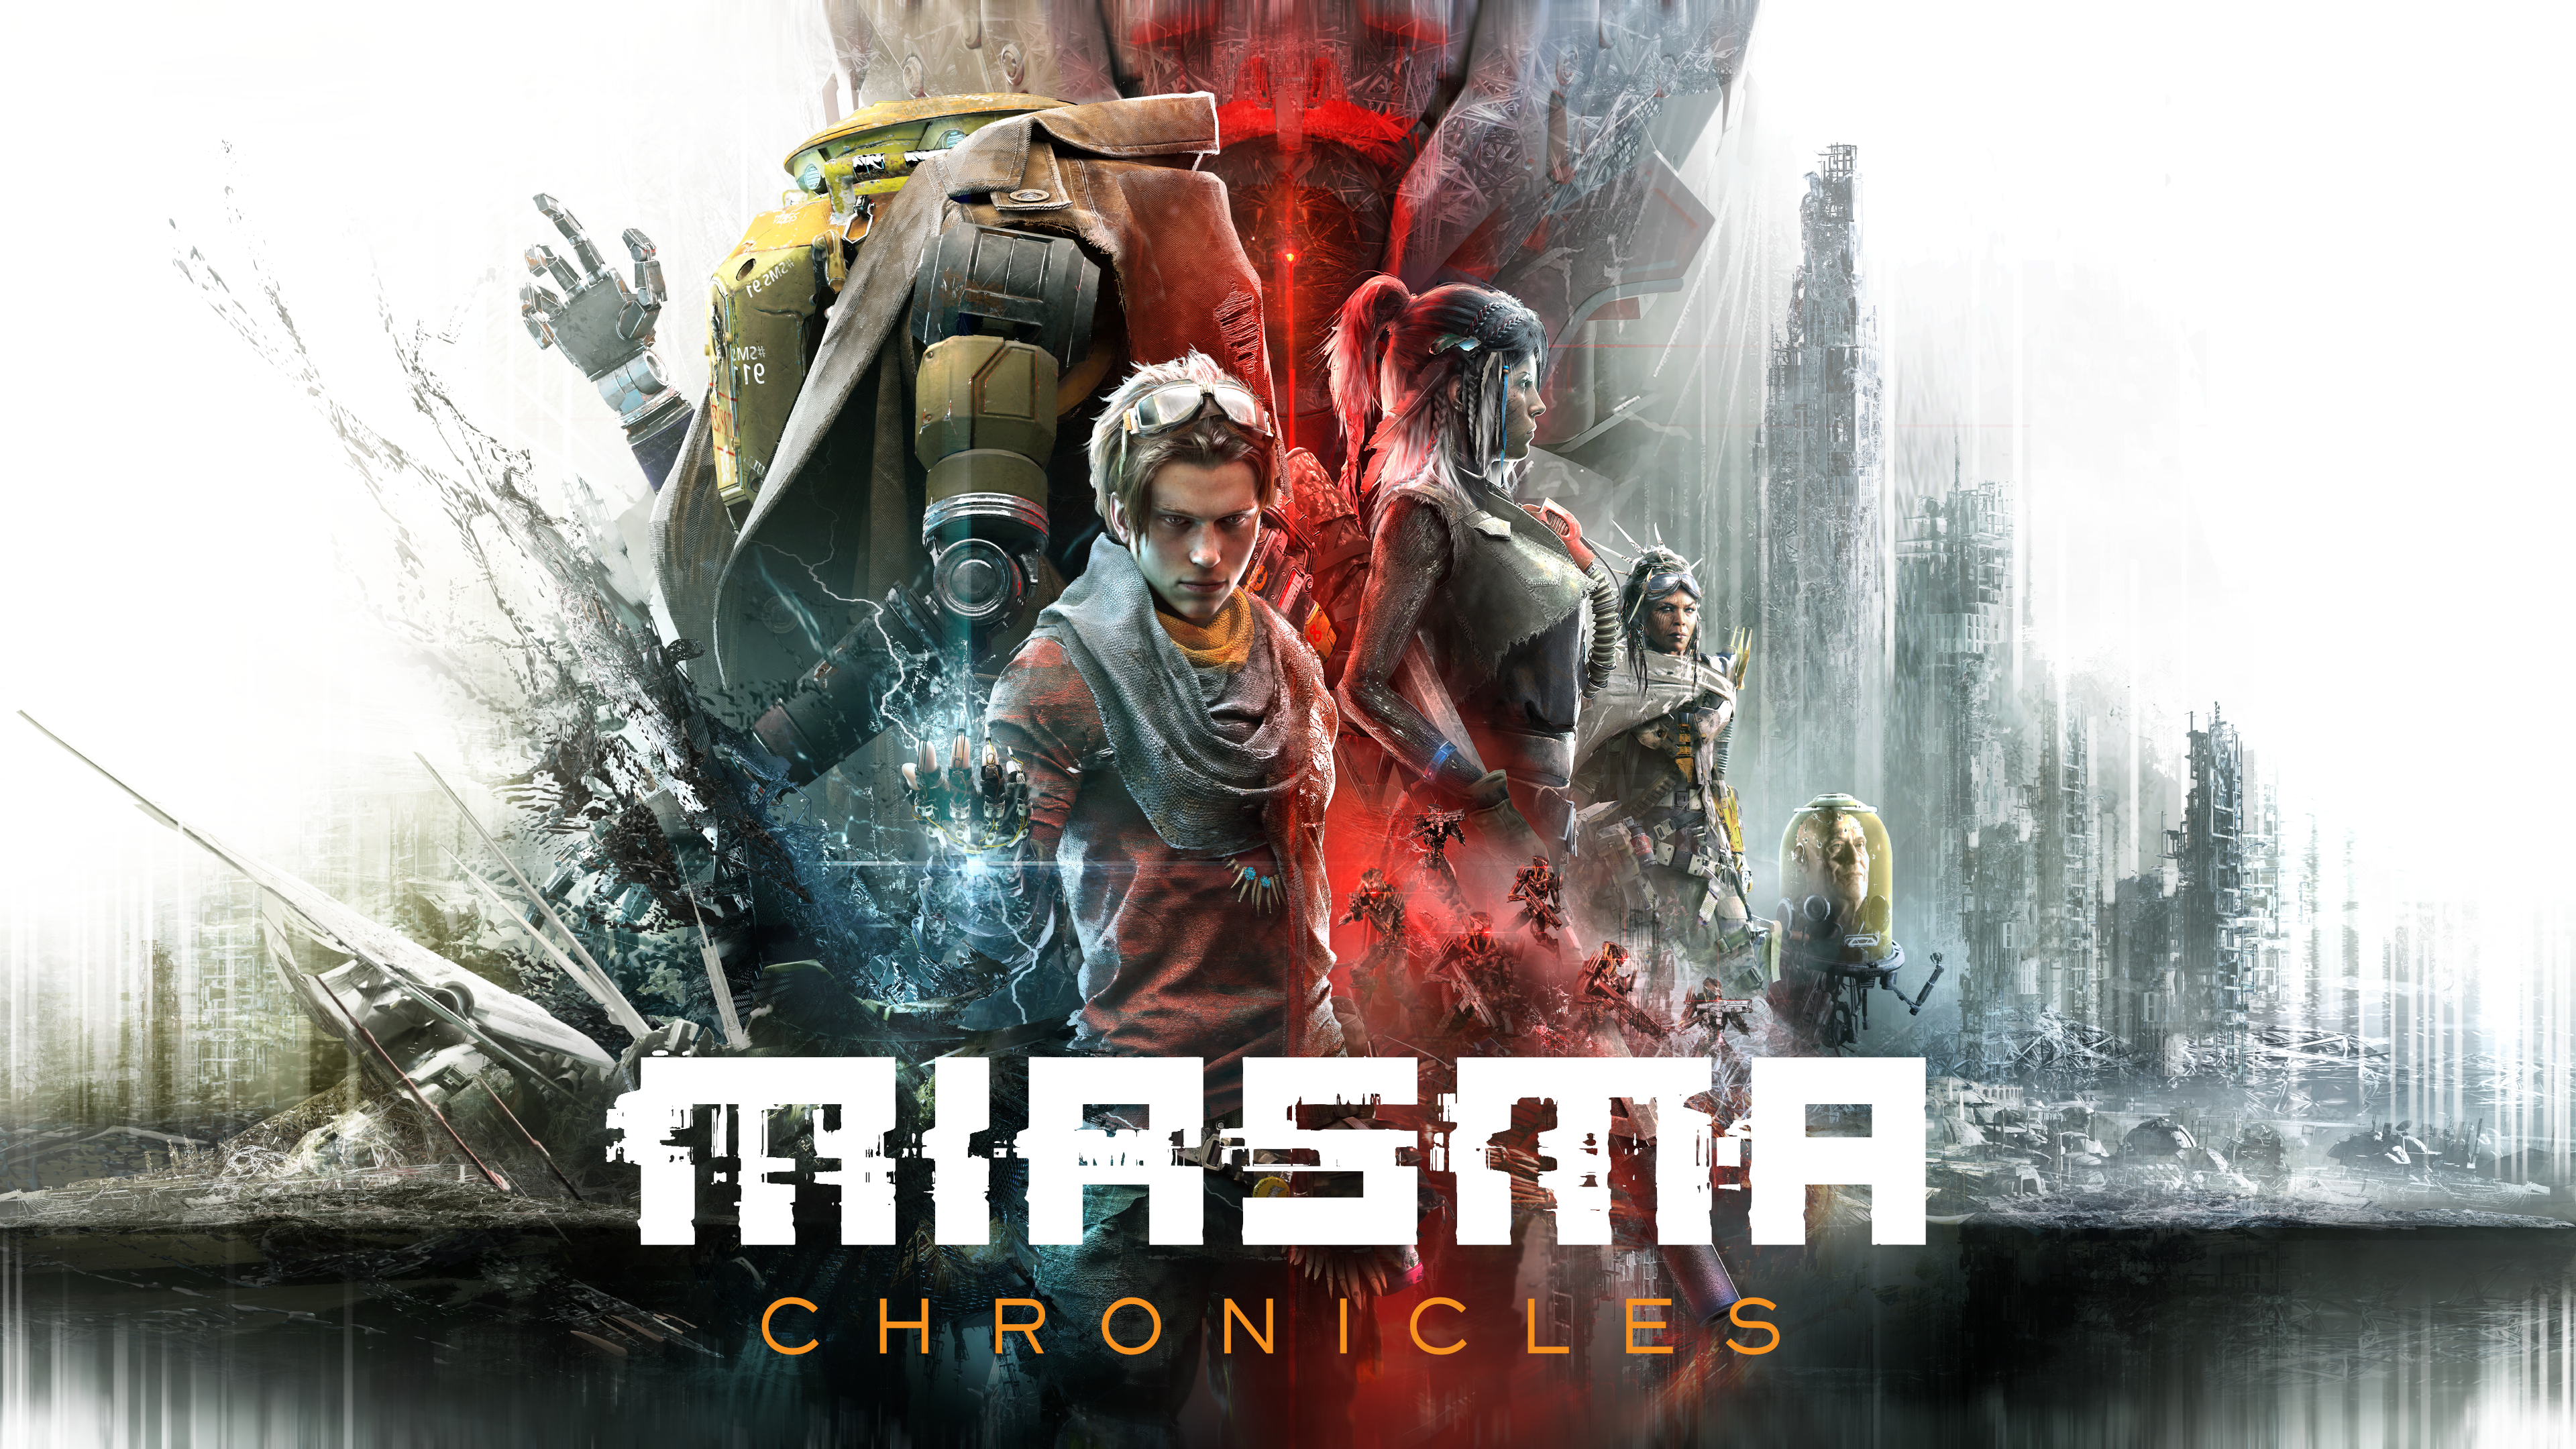 Miasma Chronicles is OUT NOW!